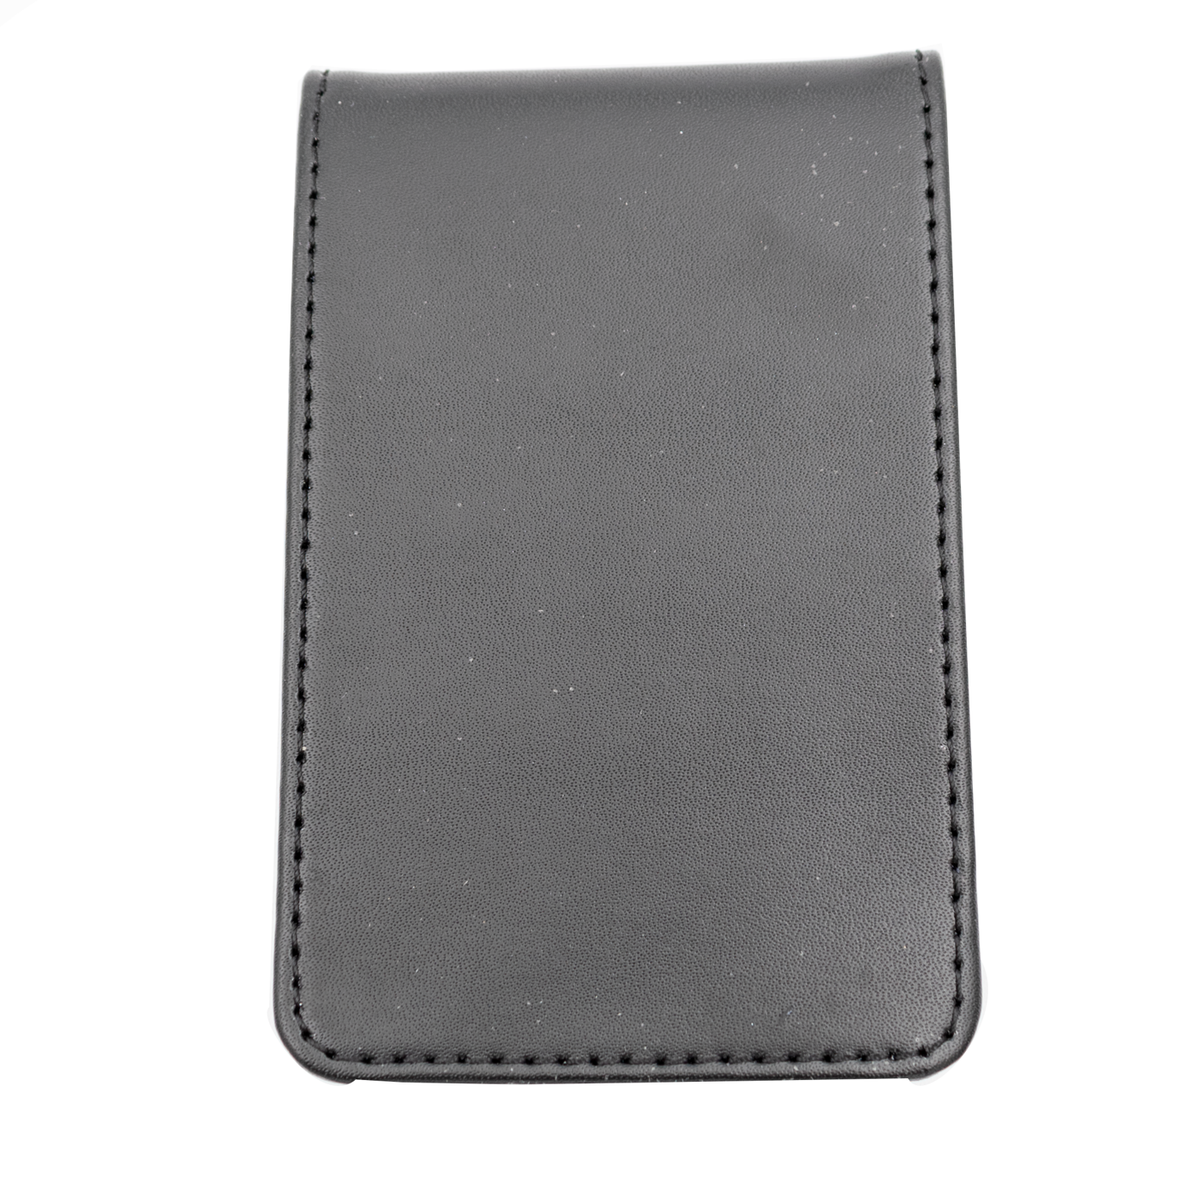 Black Leather Billfold with Moneyclip